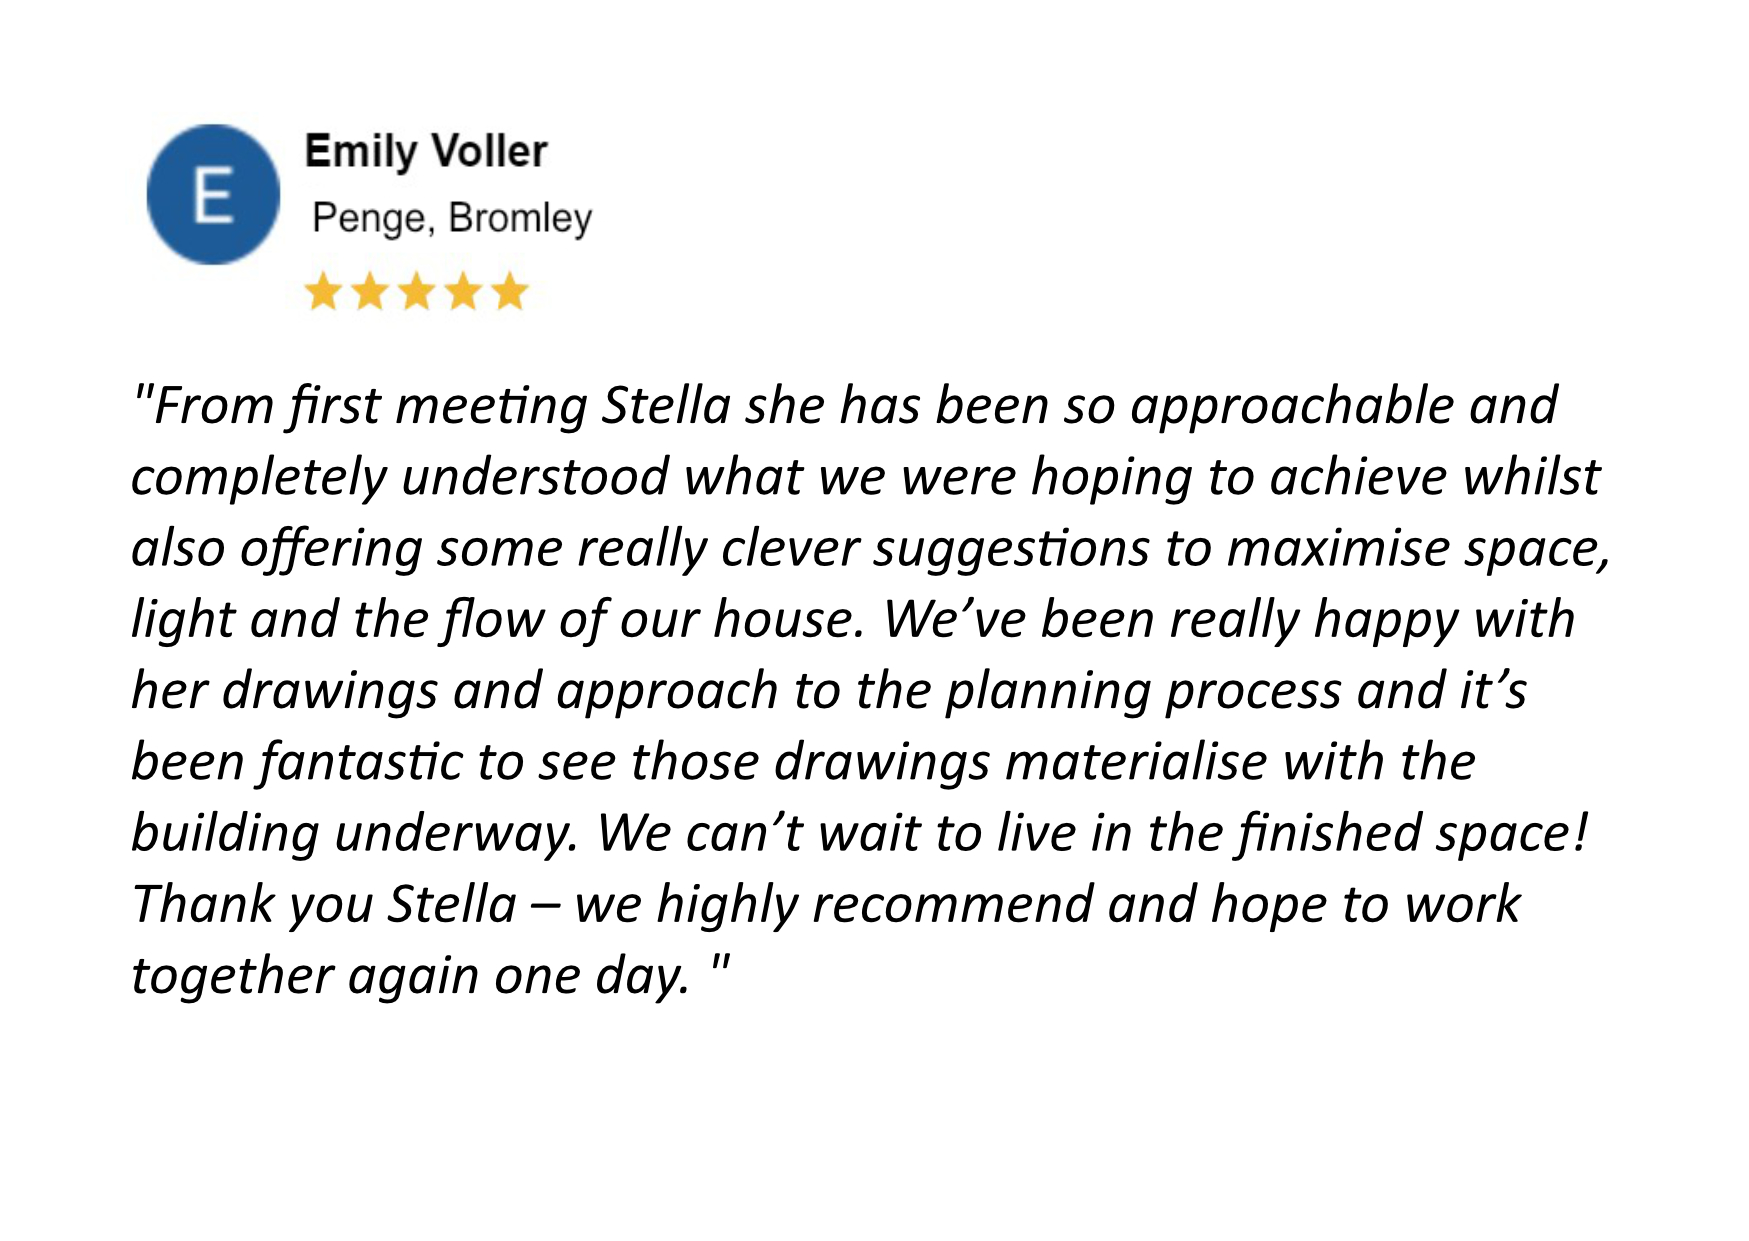 5 star review for the Extension and Loft Conversion in Penge, Bromley designed by Stella Kordista, RIBA Architect